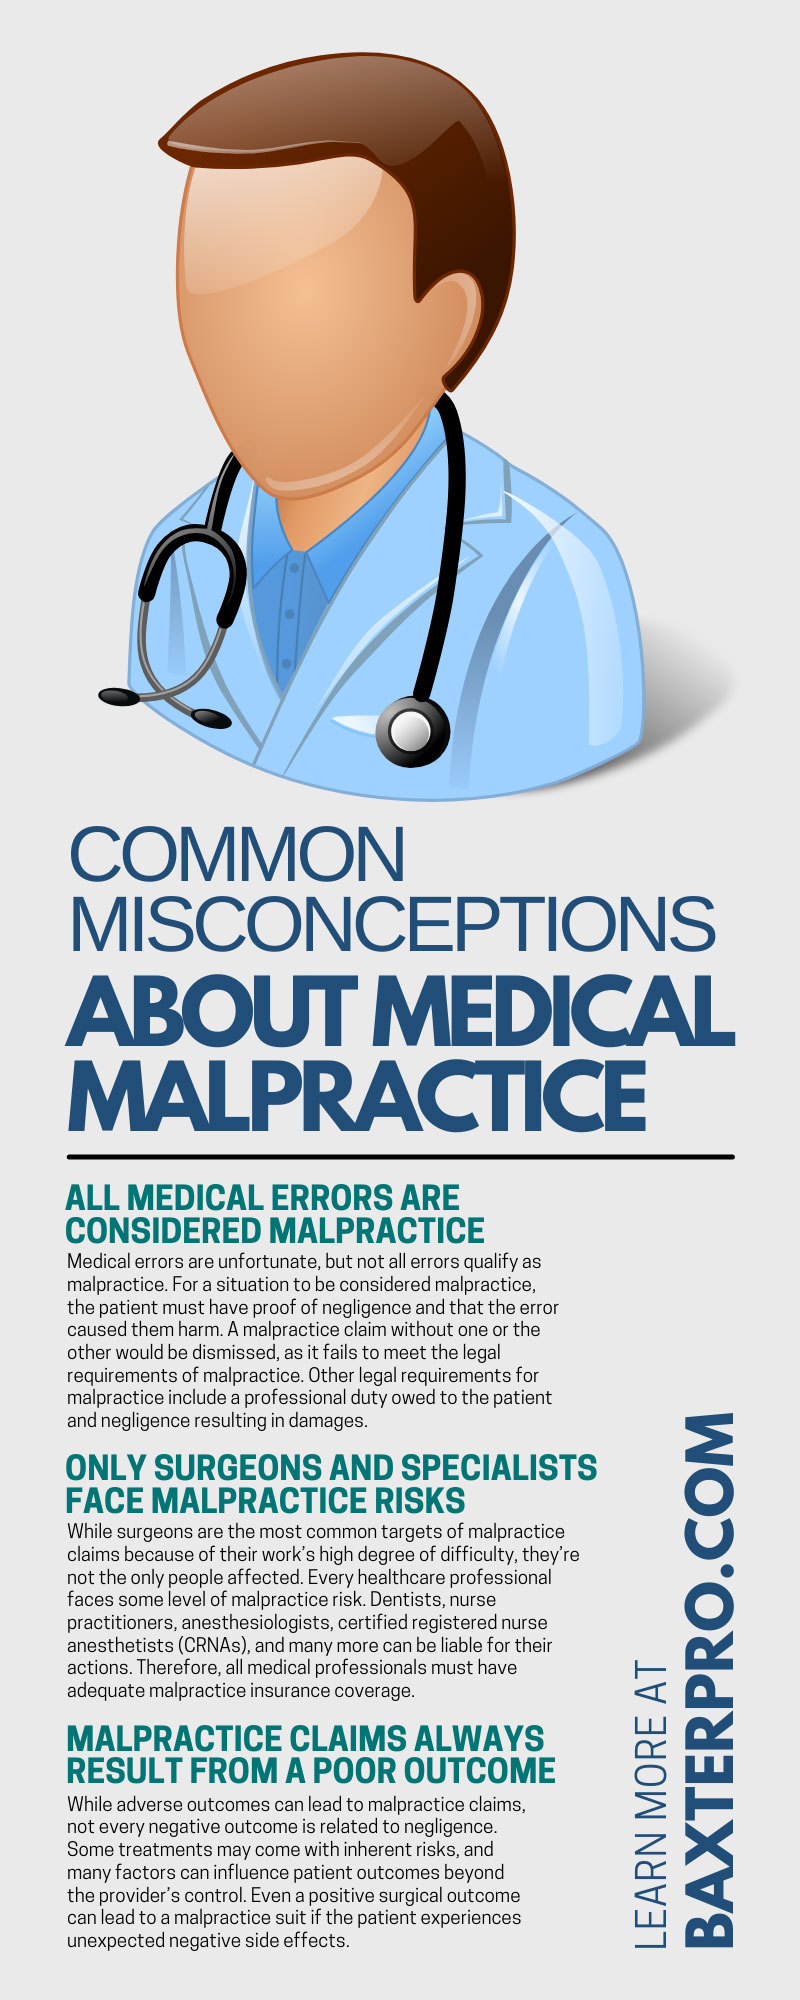 Common Misconceptions About Medical Malpractice